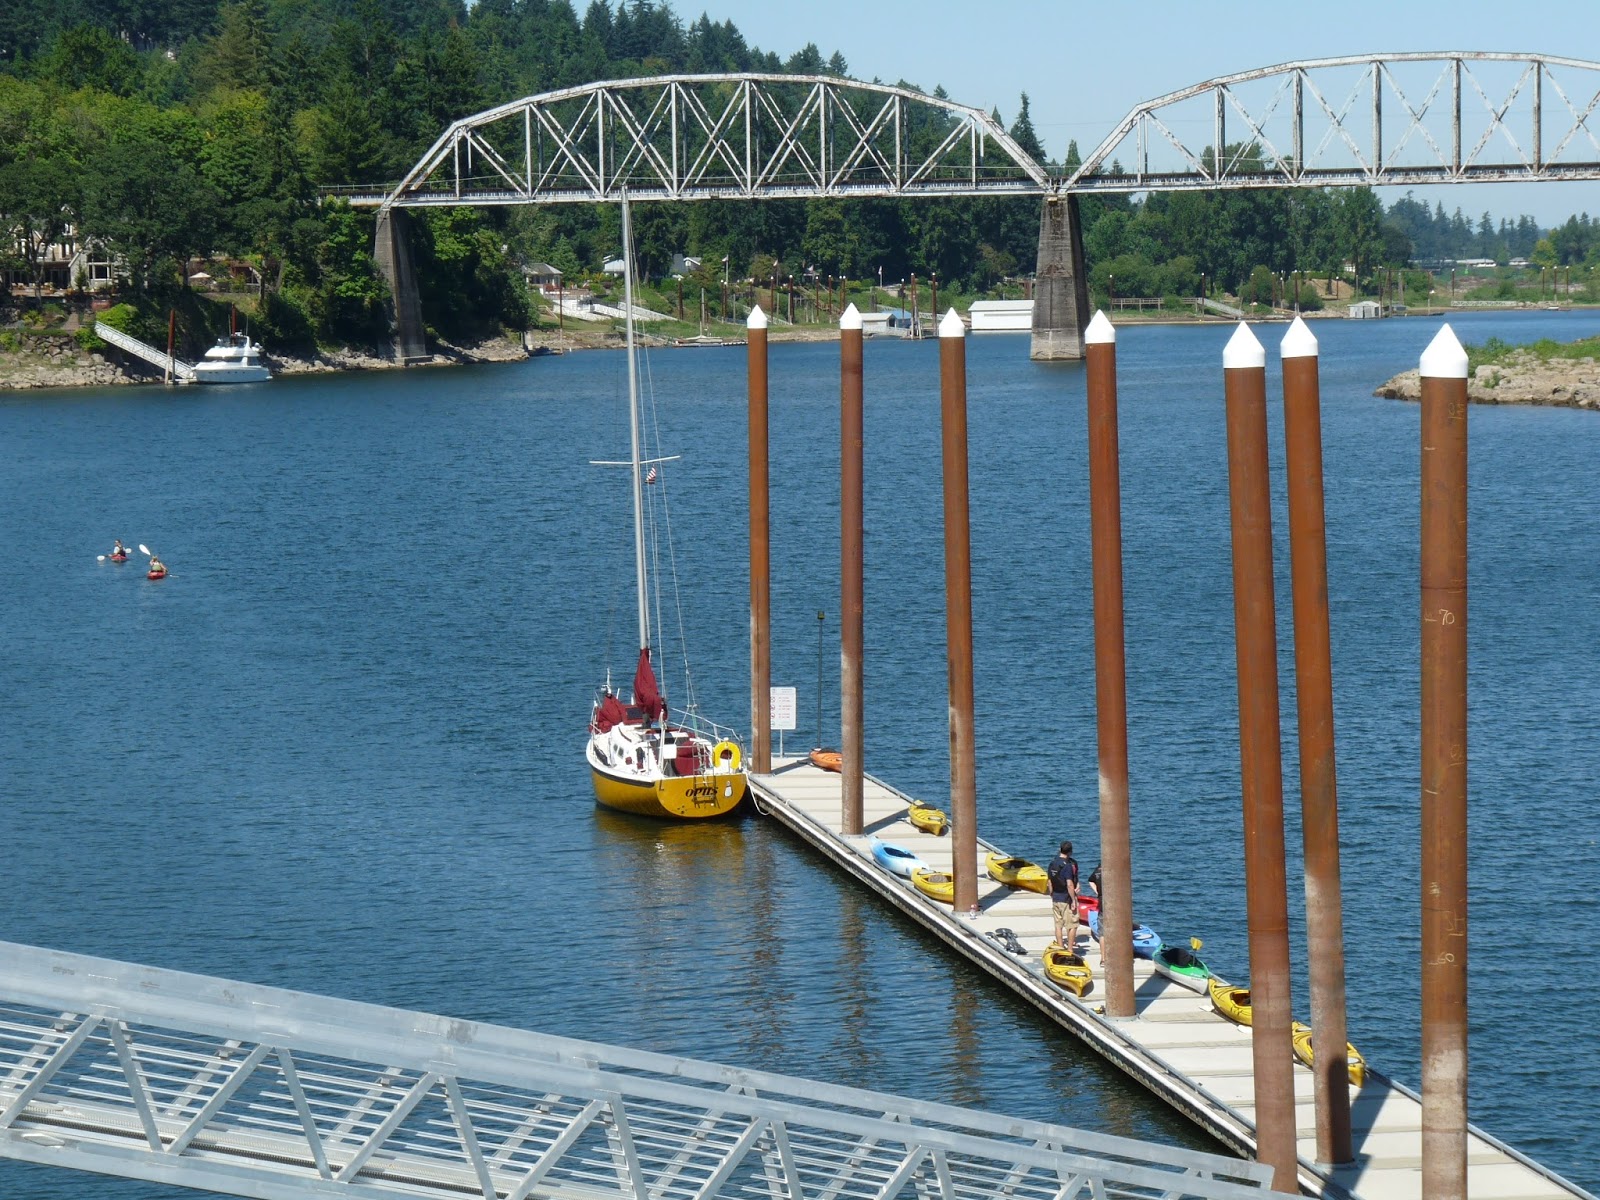 View of Willamette River, Portland Oregon with a dock and kayaks in the foreground for a company picnic